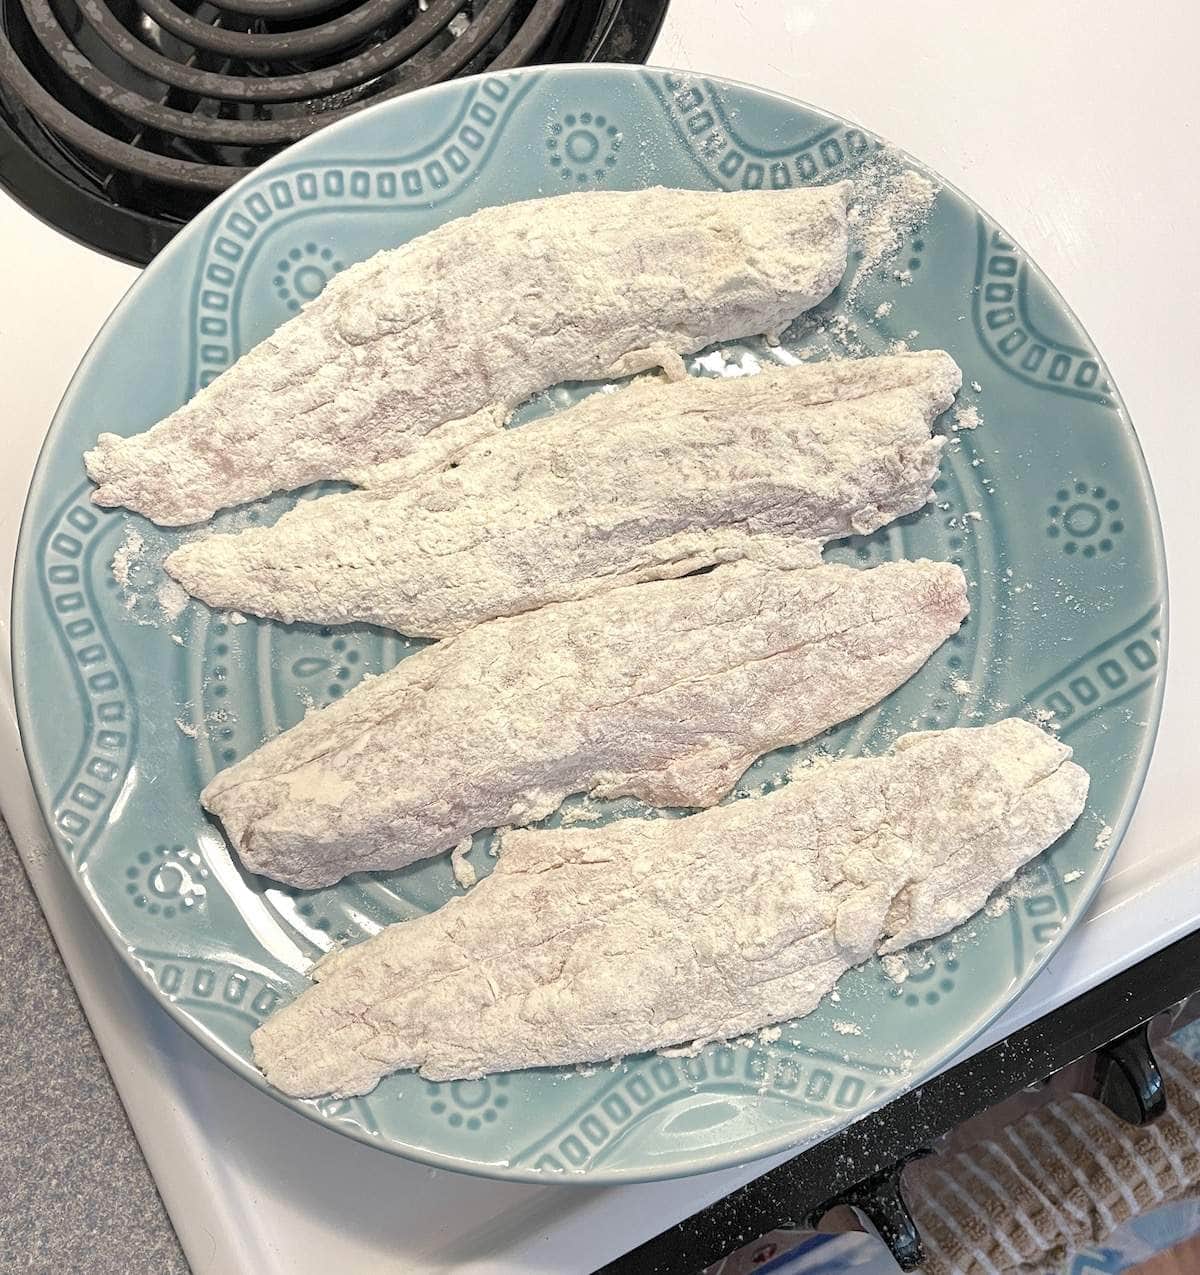 Trout fillets coated in flour on a blue plates.